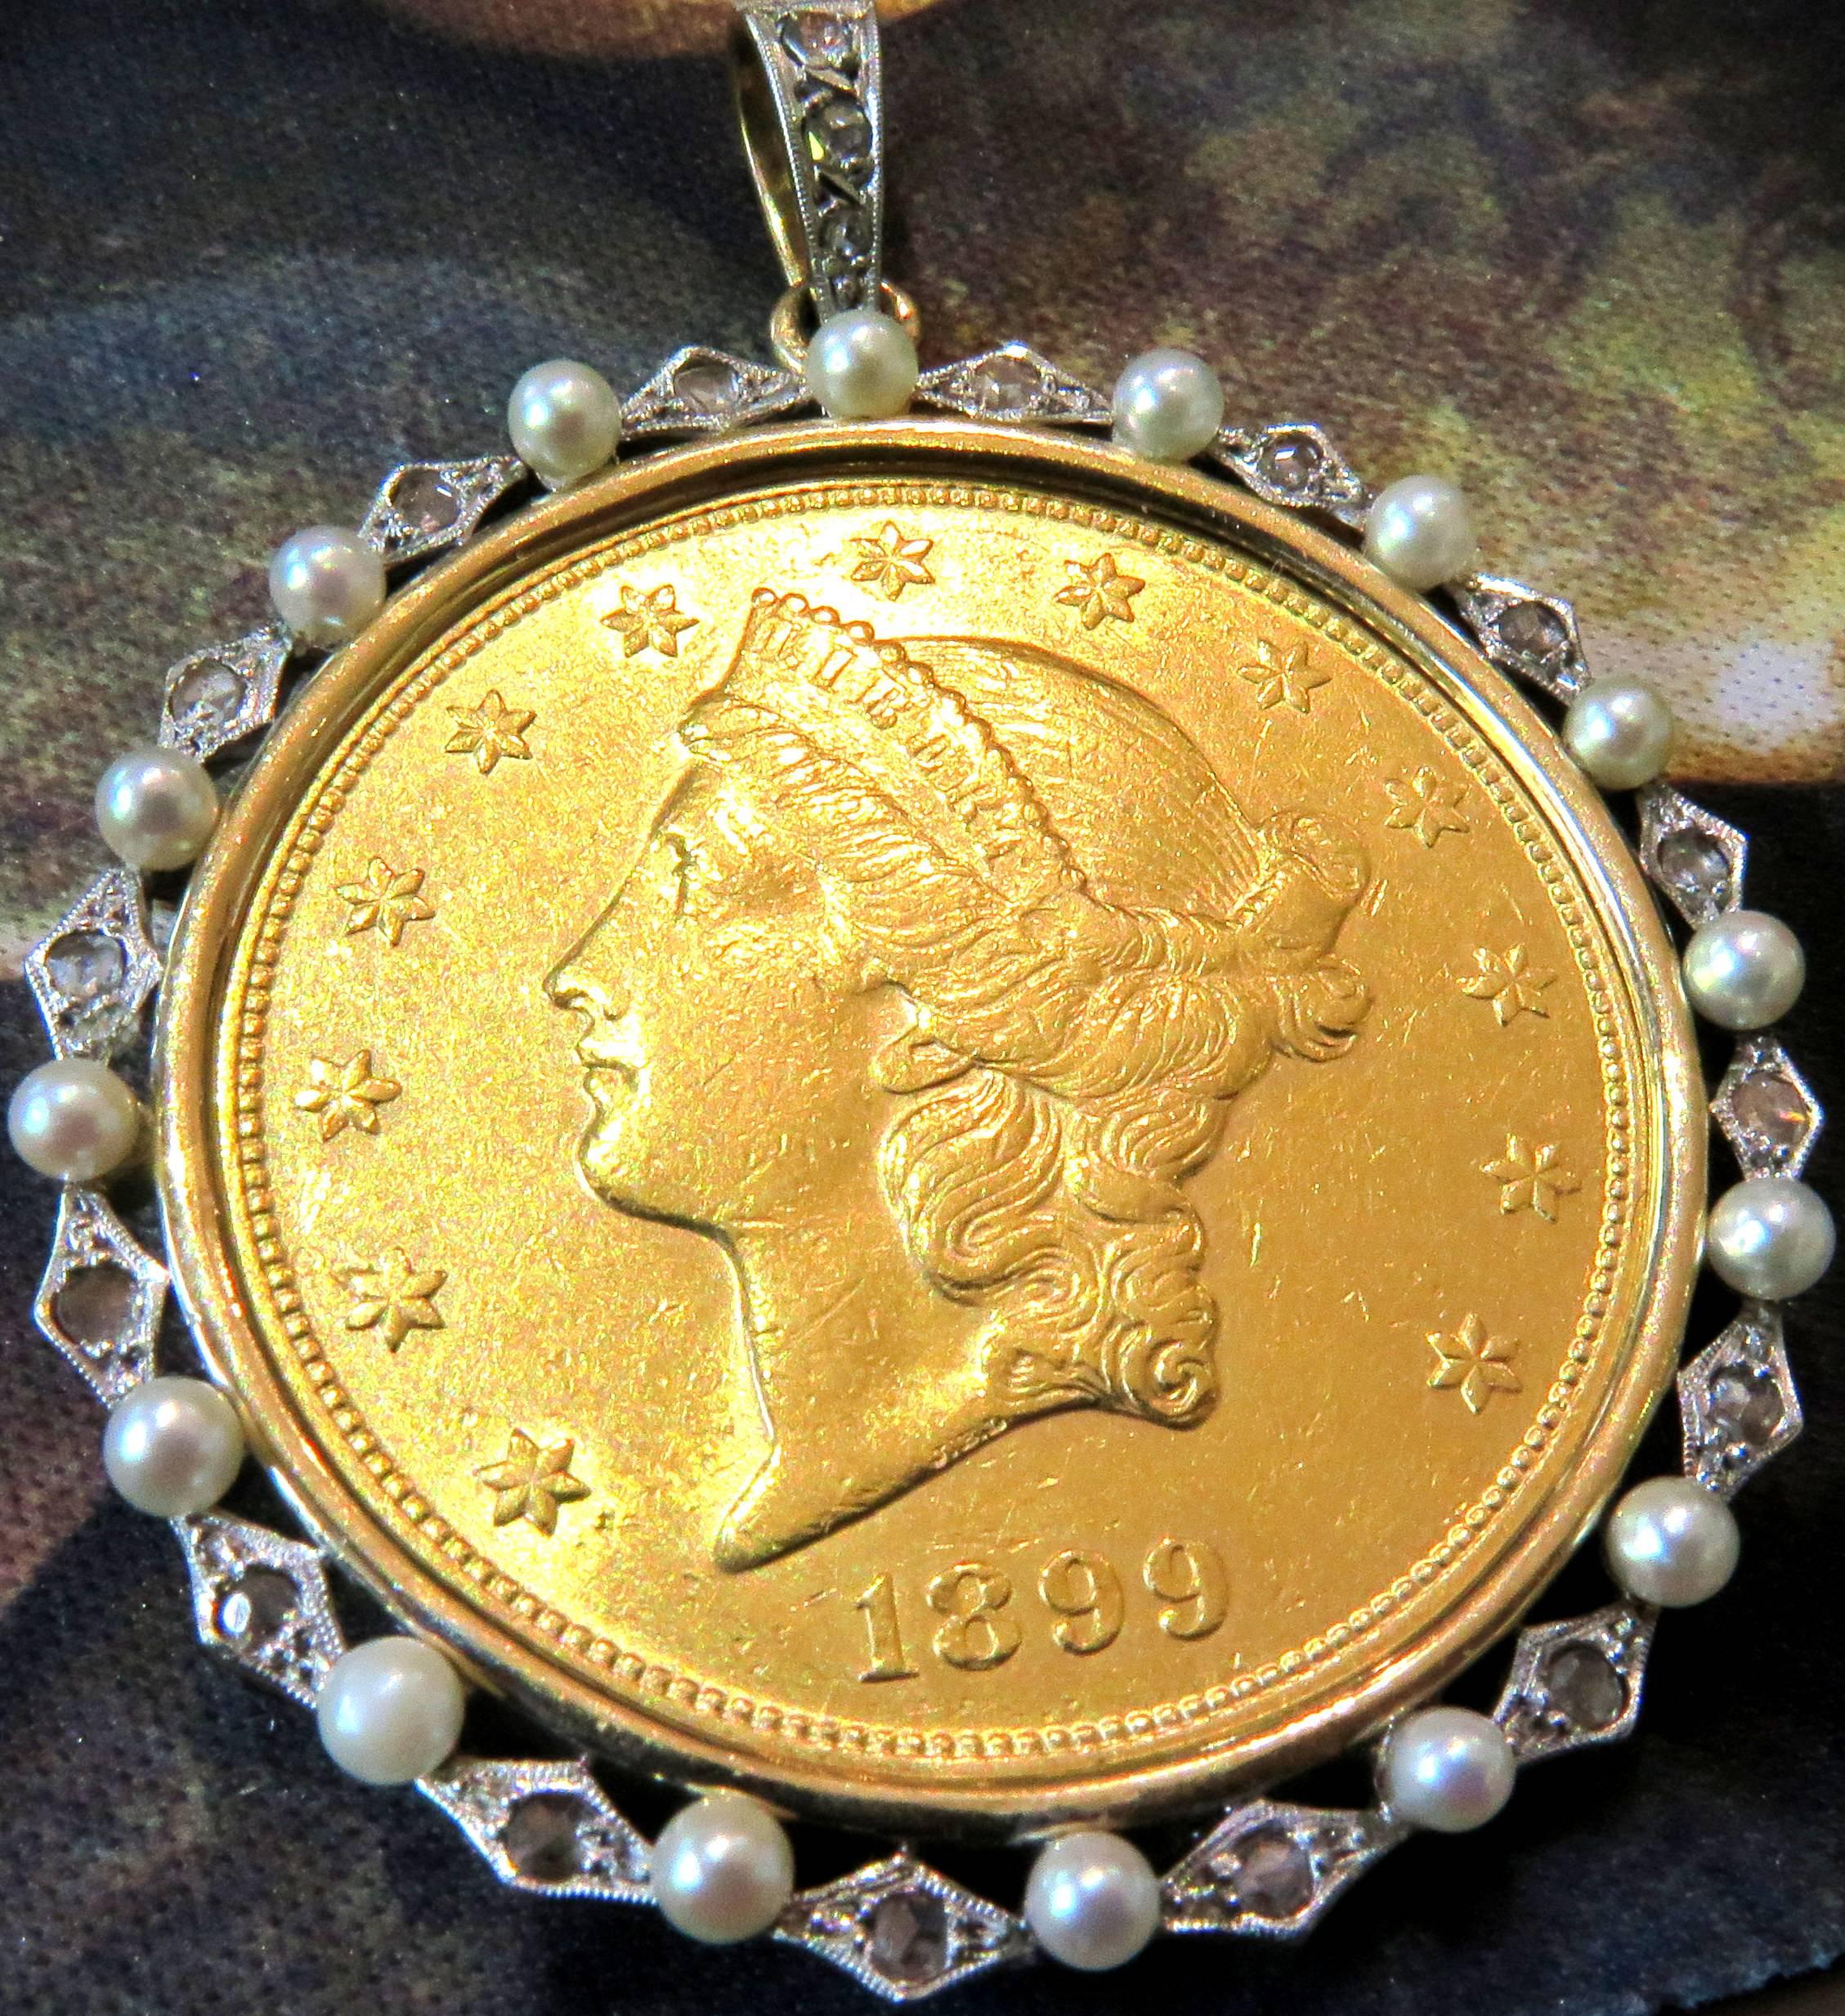 This Edwardian period framed twenty dollar gold piece is a timeless classic!
The frame is platinum topped and gold back. The coin is surrounded with rose cut diamonds and natural pearls. This $20- gold piece is dated 1899.
This piece weighs 42.9